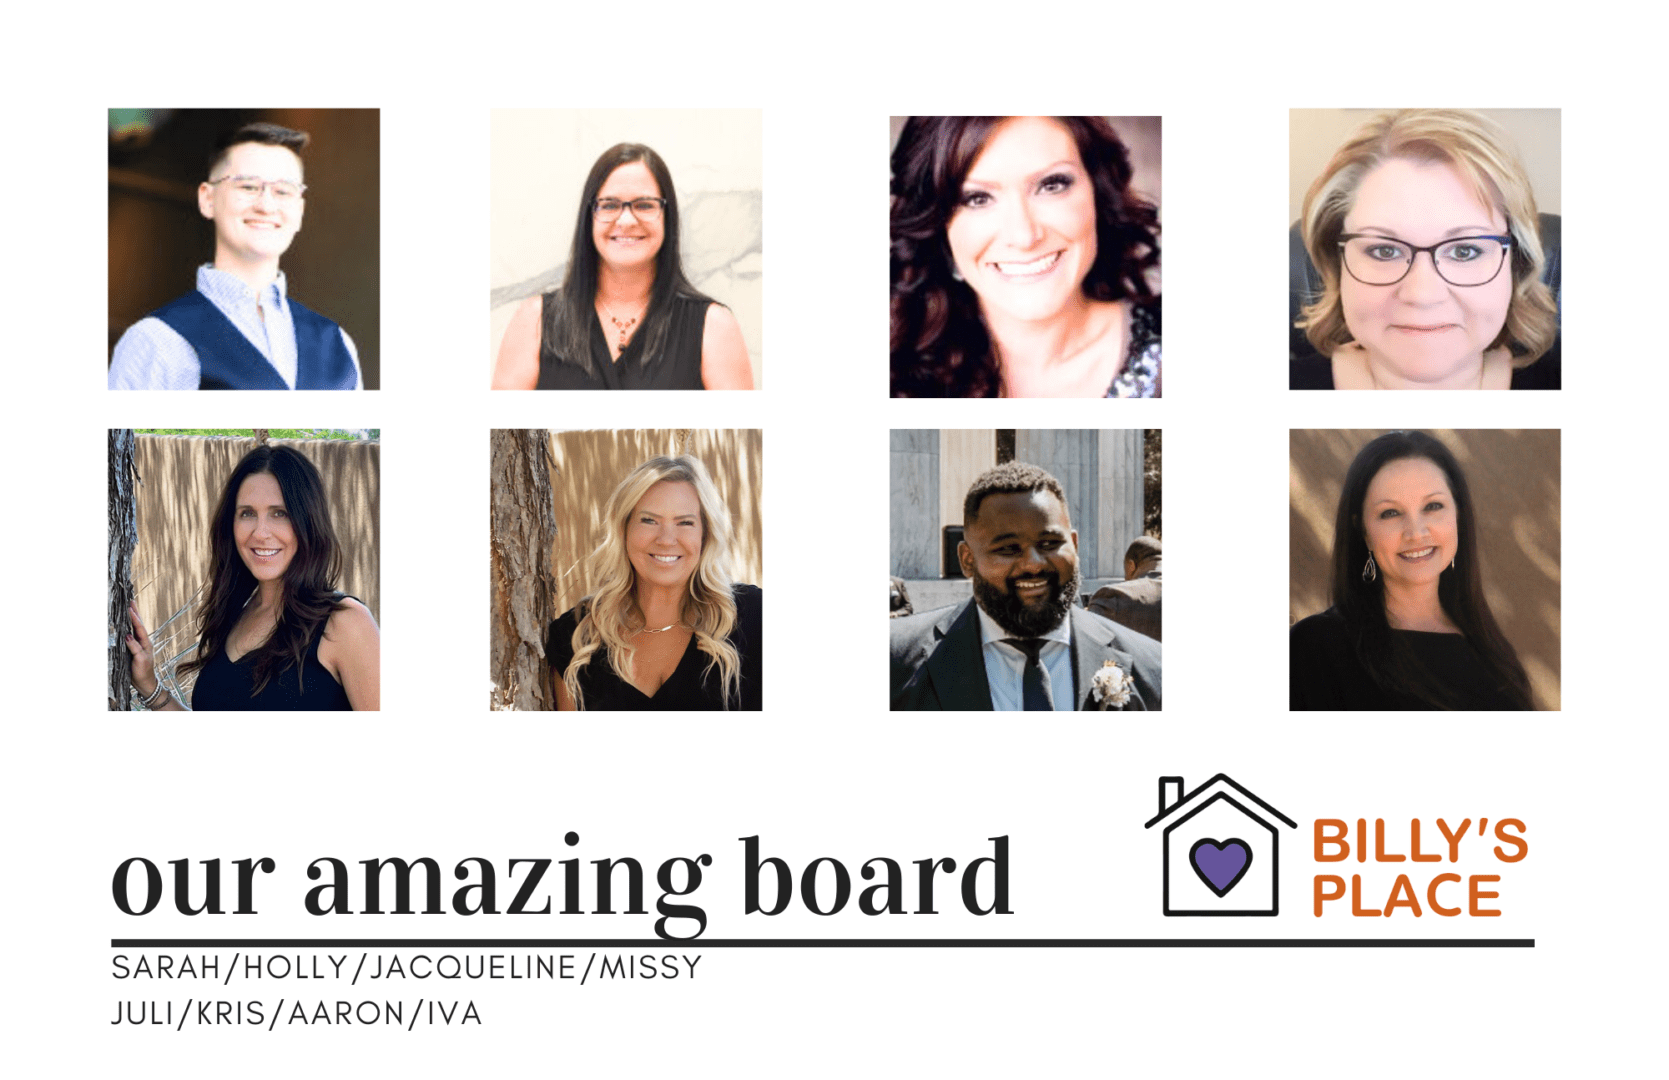 Collage of eight diverse professional headshots labeled "our amazing board" for "billy's place," each paired with names below: sarah, holly, jacqueline, missy, juli, kris, aaron, iva.